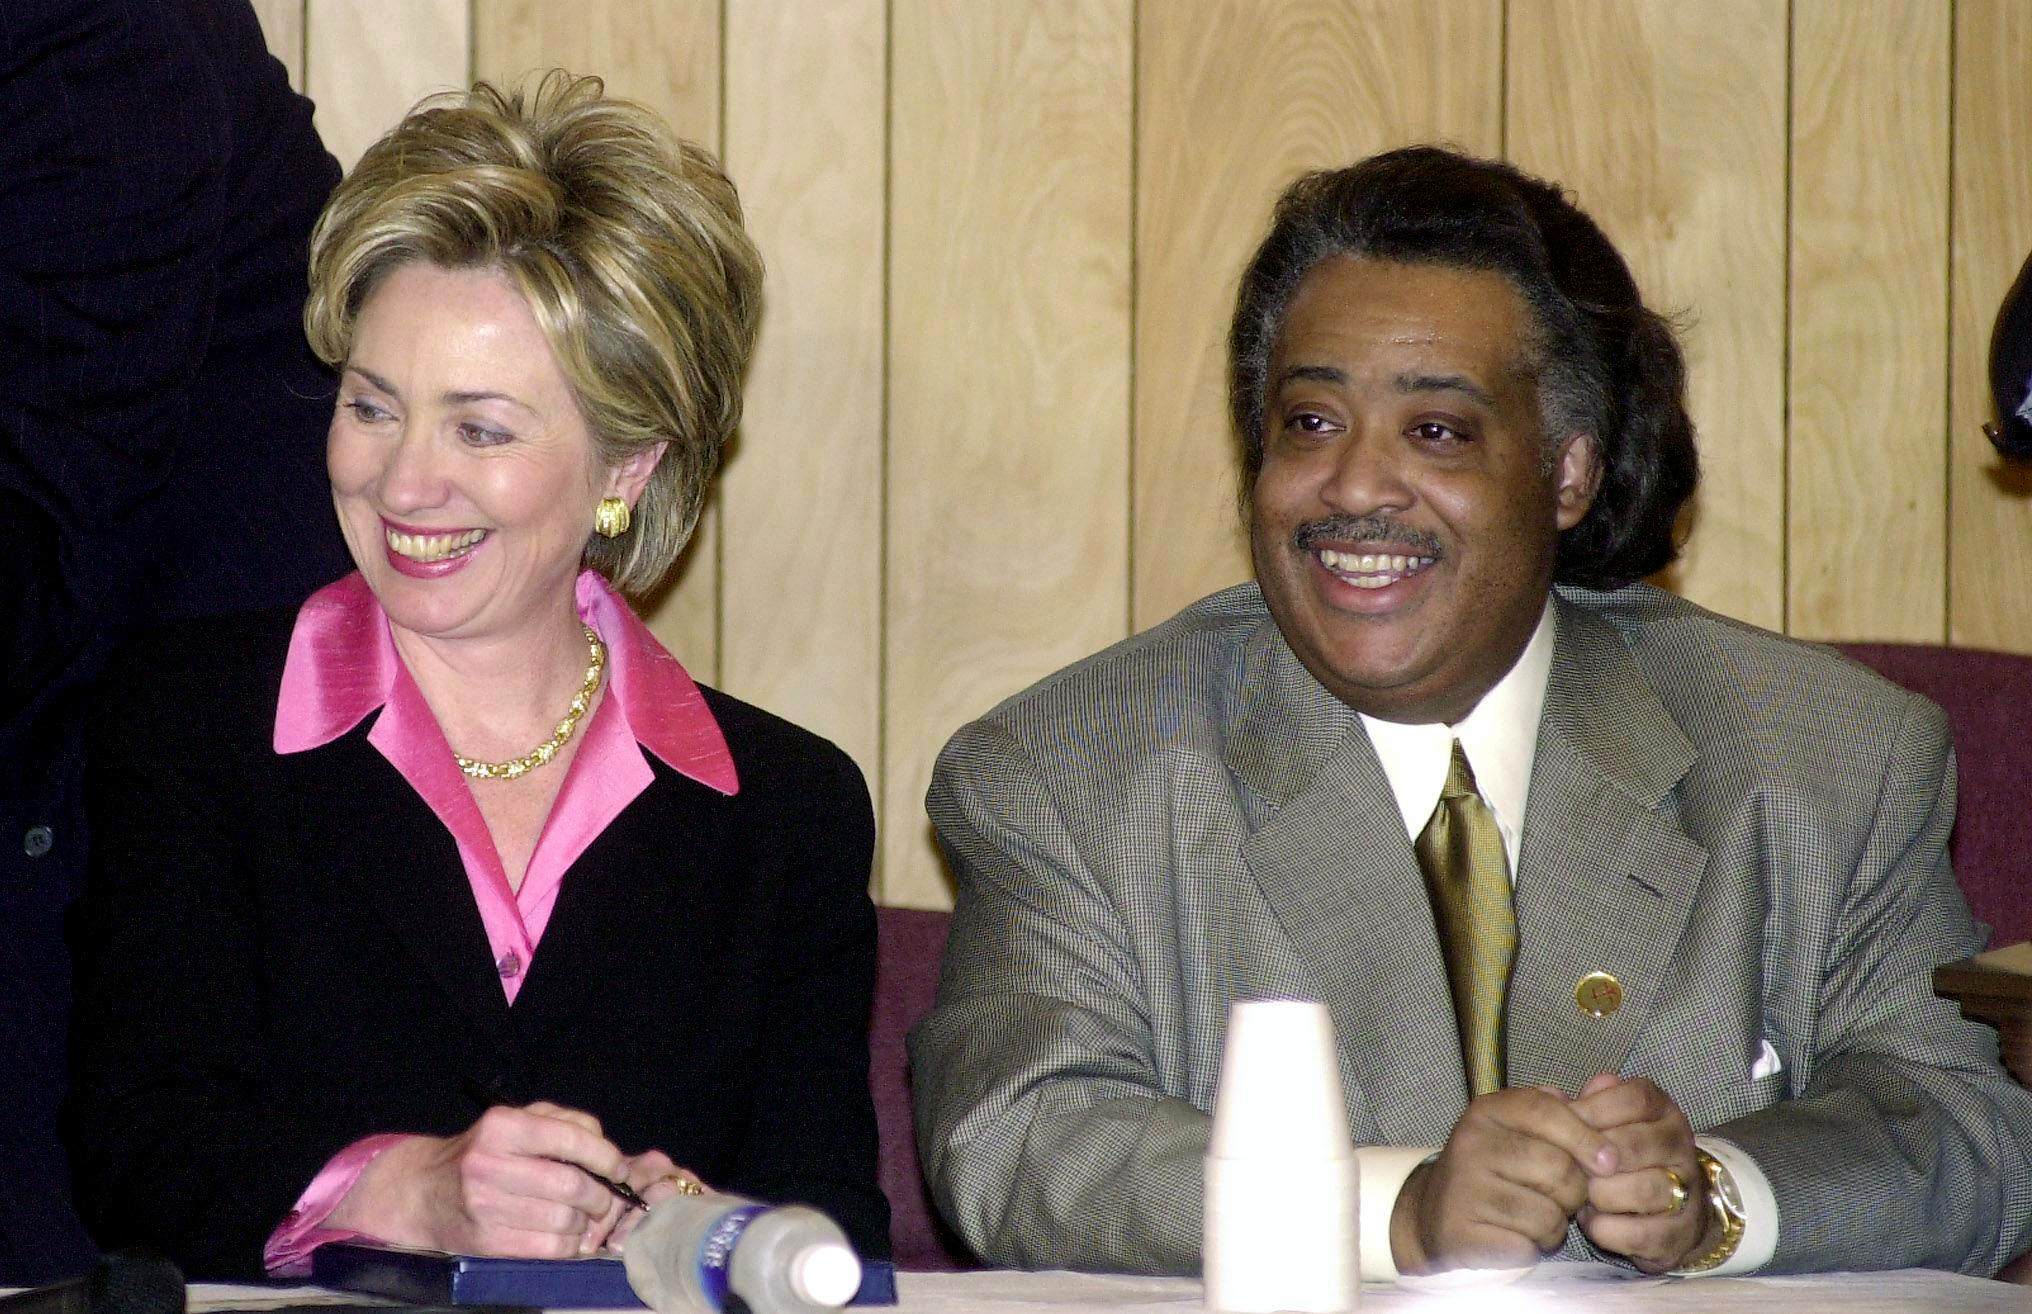 PHOTO: First Lady Hillary Rodham Clinton and the  Reverend Al Sharpton attend the annual Martin Luther King Jr. Public Policy Forum in New York City, Jan. 17, 2000.